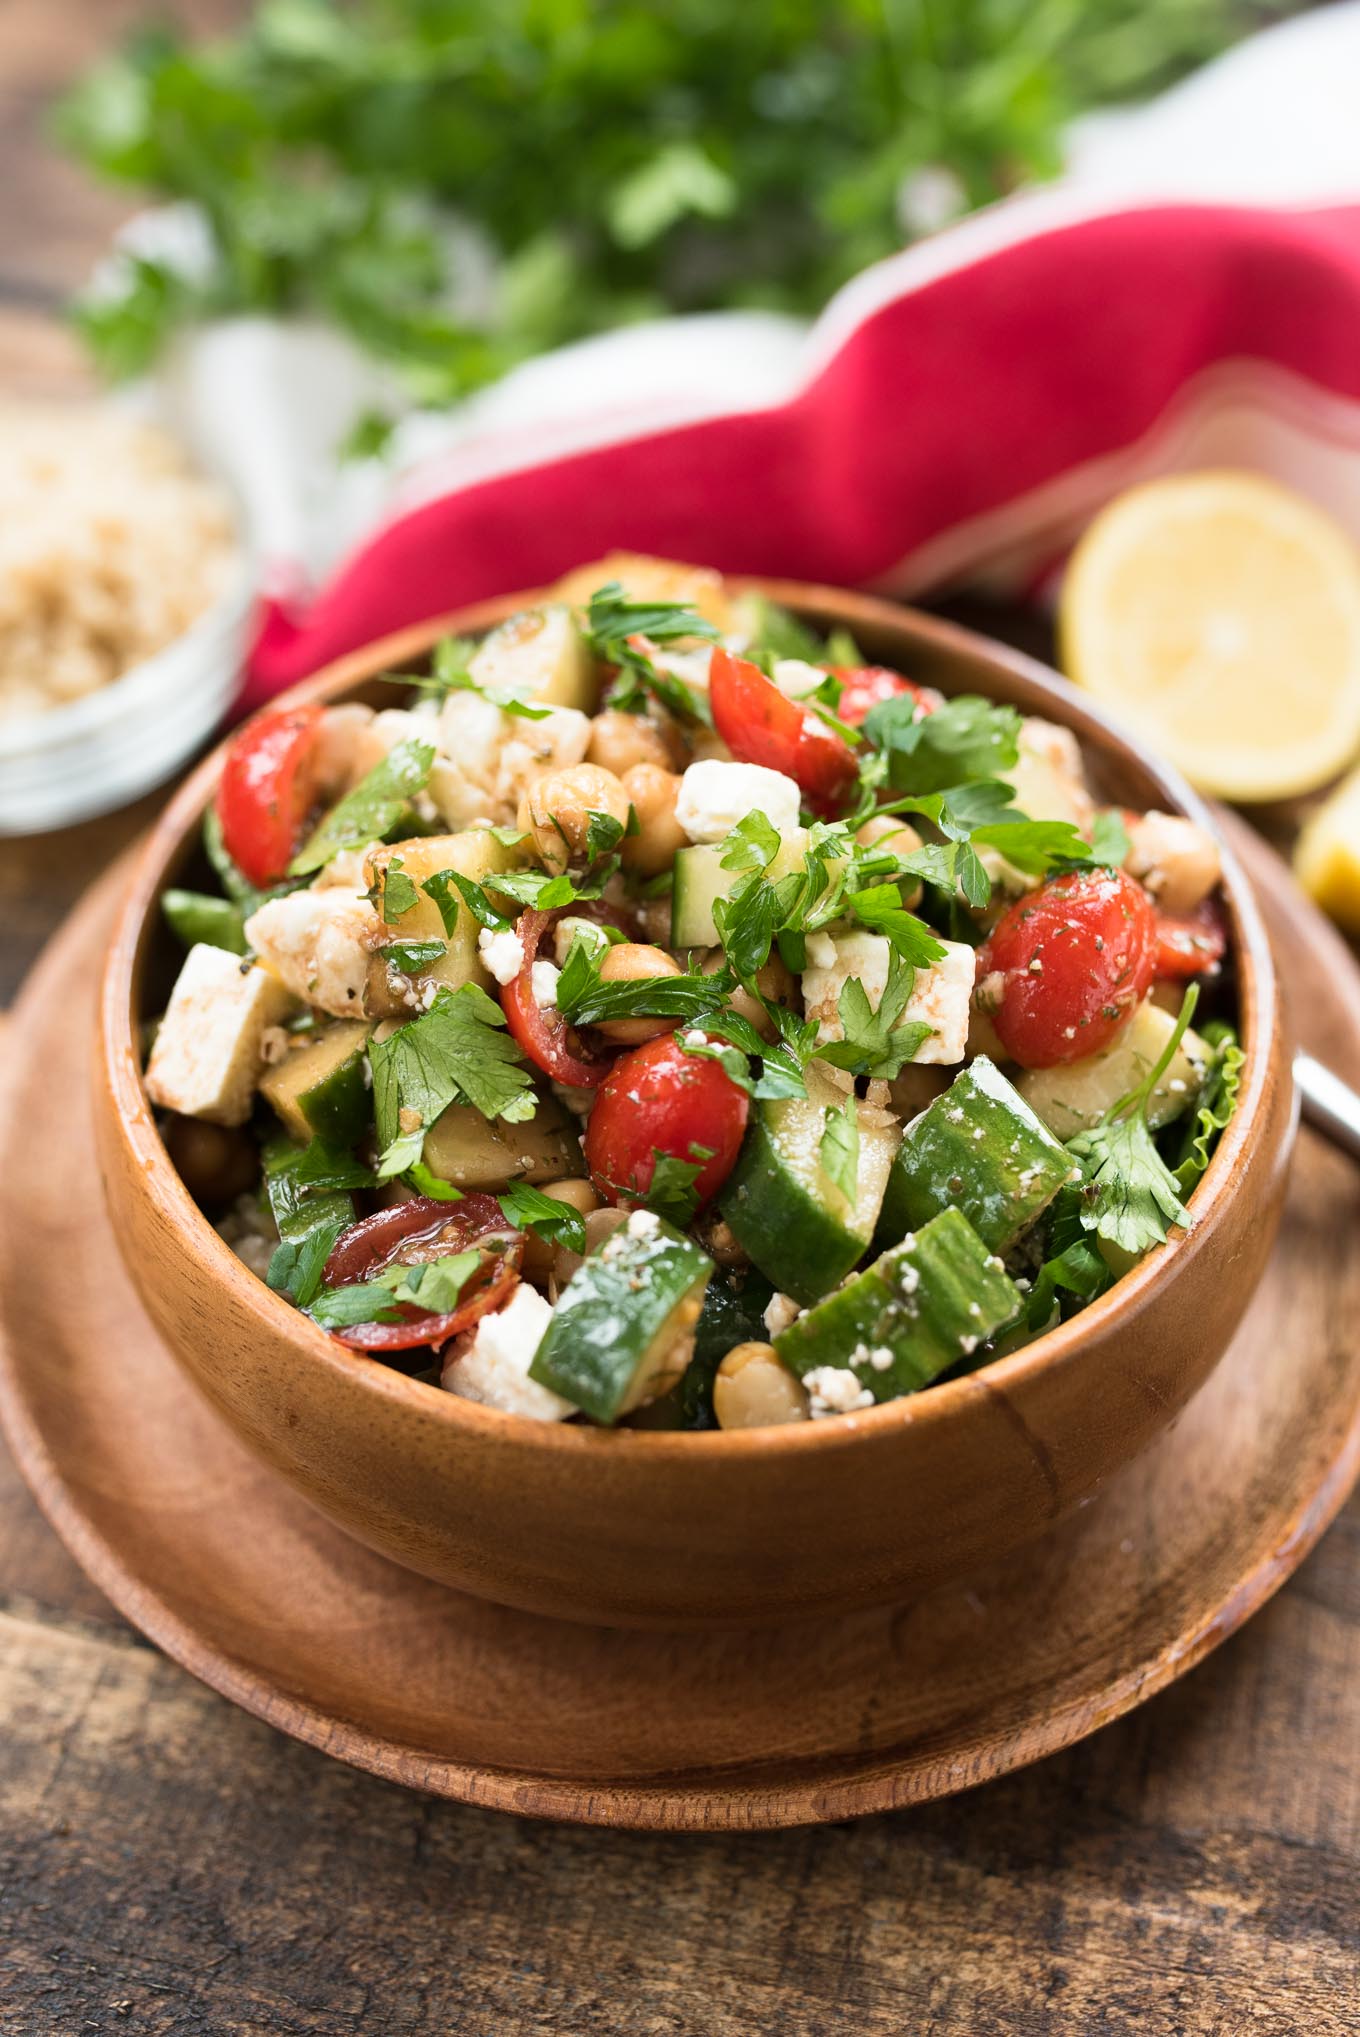 Mediterranean Power Bowl- a plant-based, protein and fiber packed lunch or dinner! | www.nutritiouseats.com